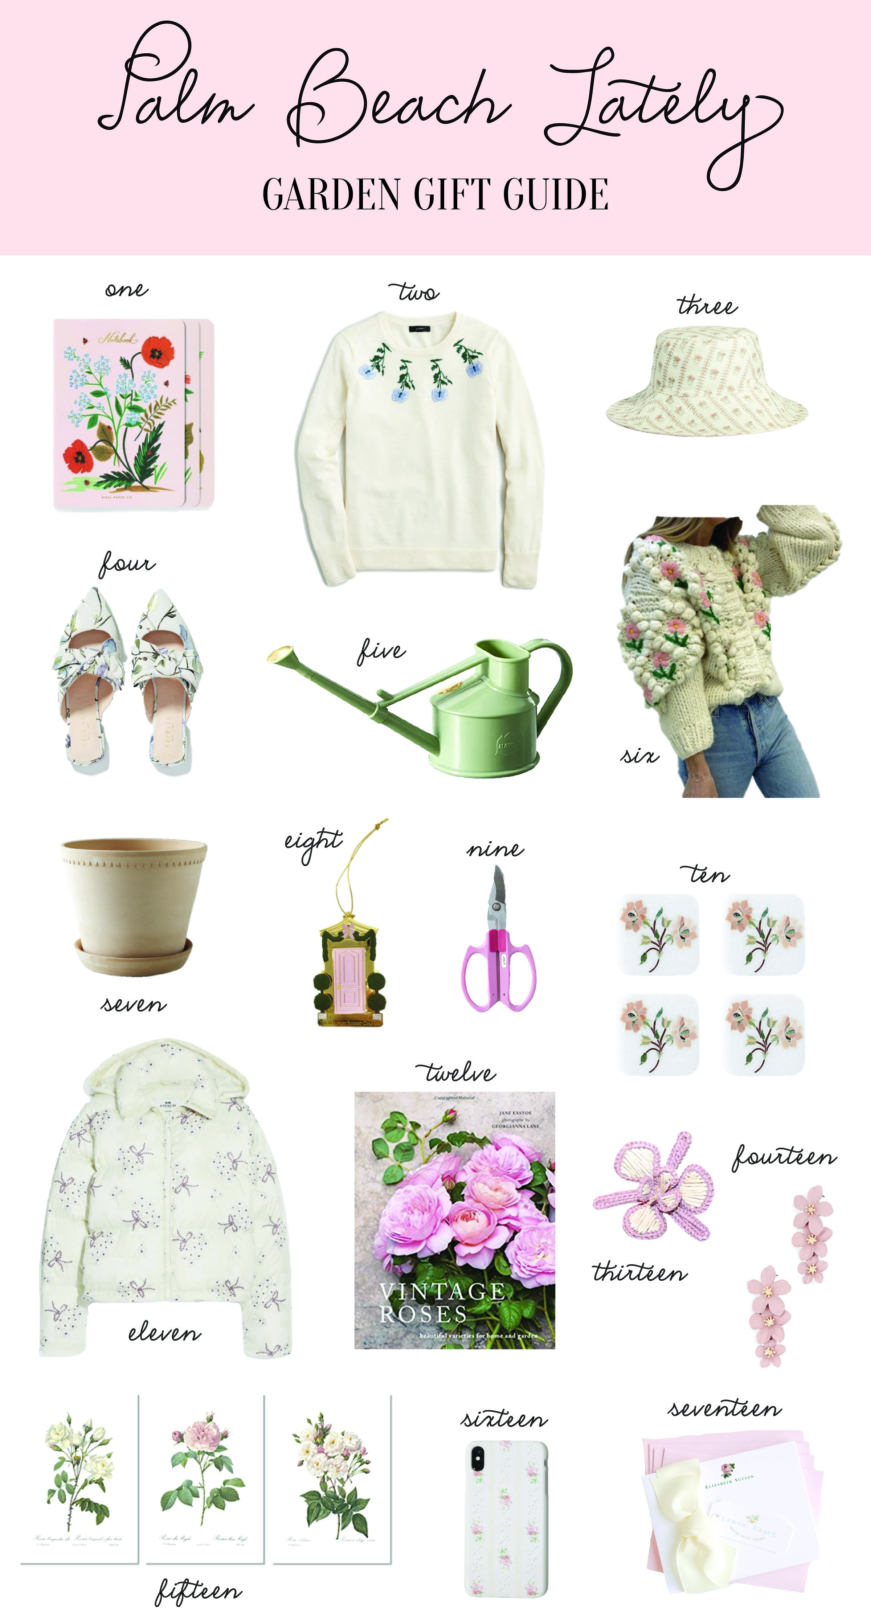 Holiday: Garden Gift Guide with Palm Beach Lately